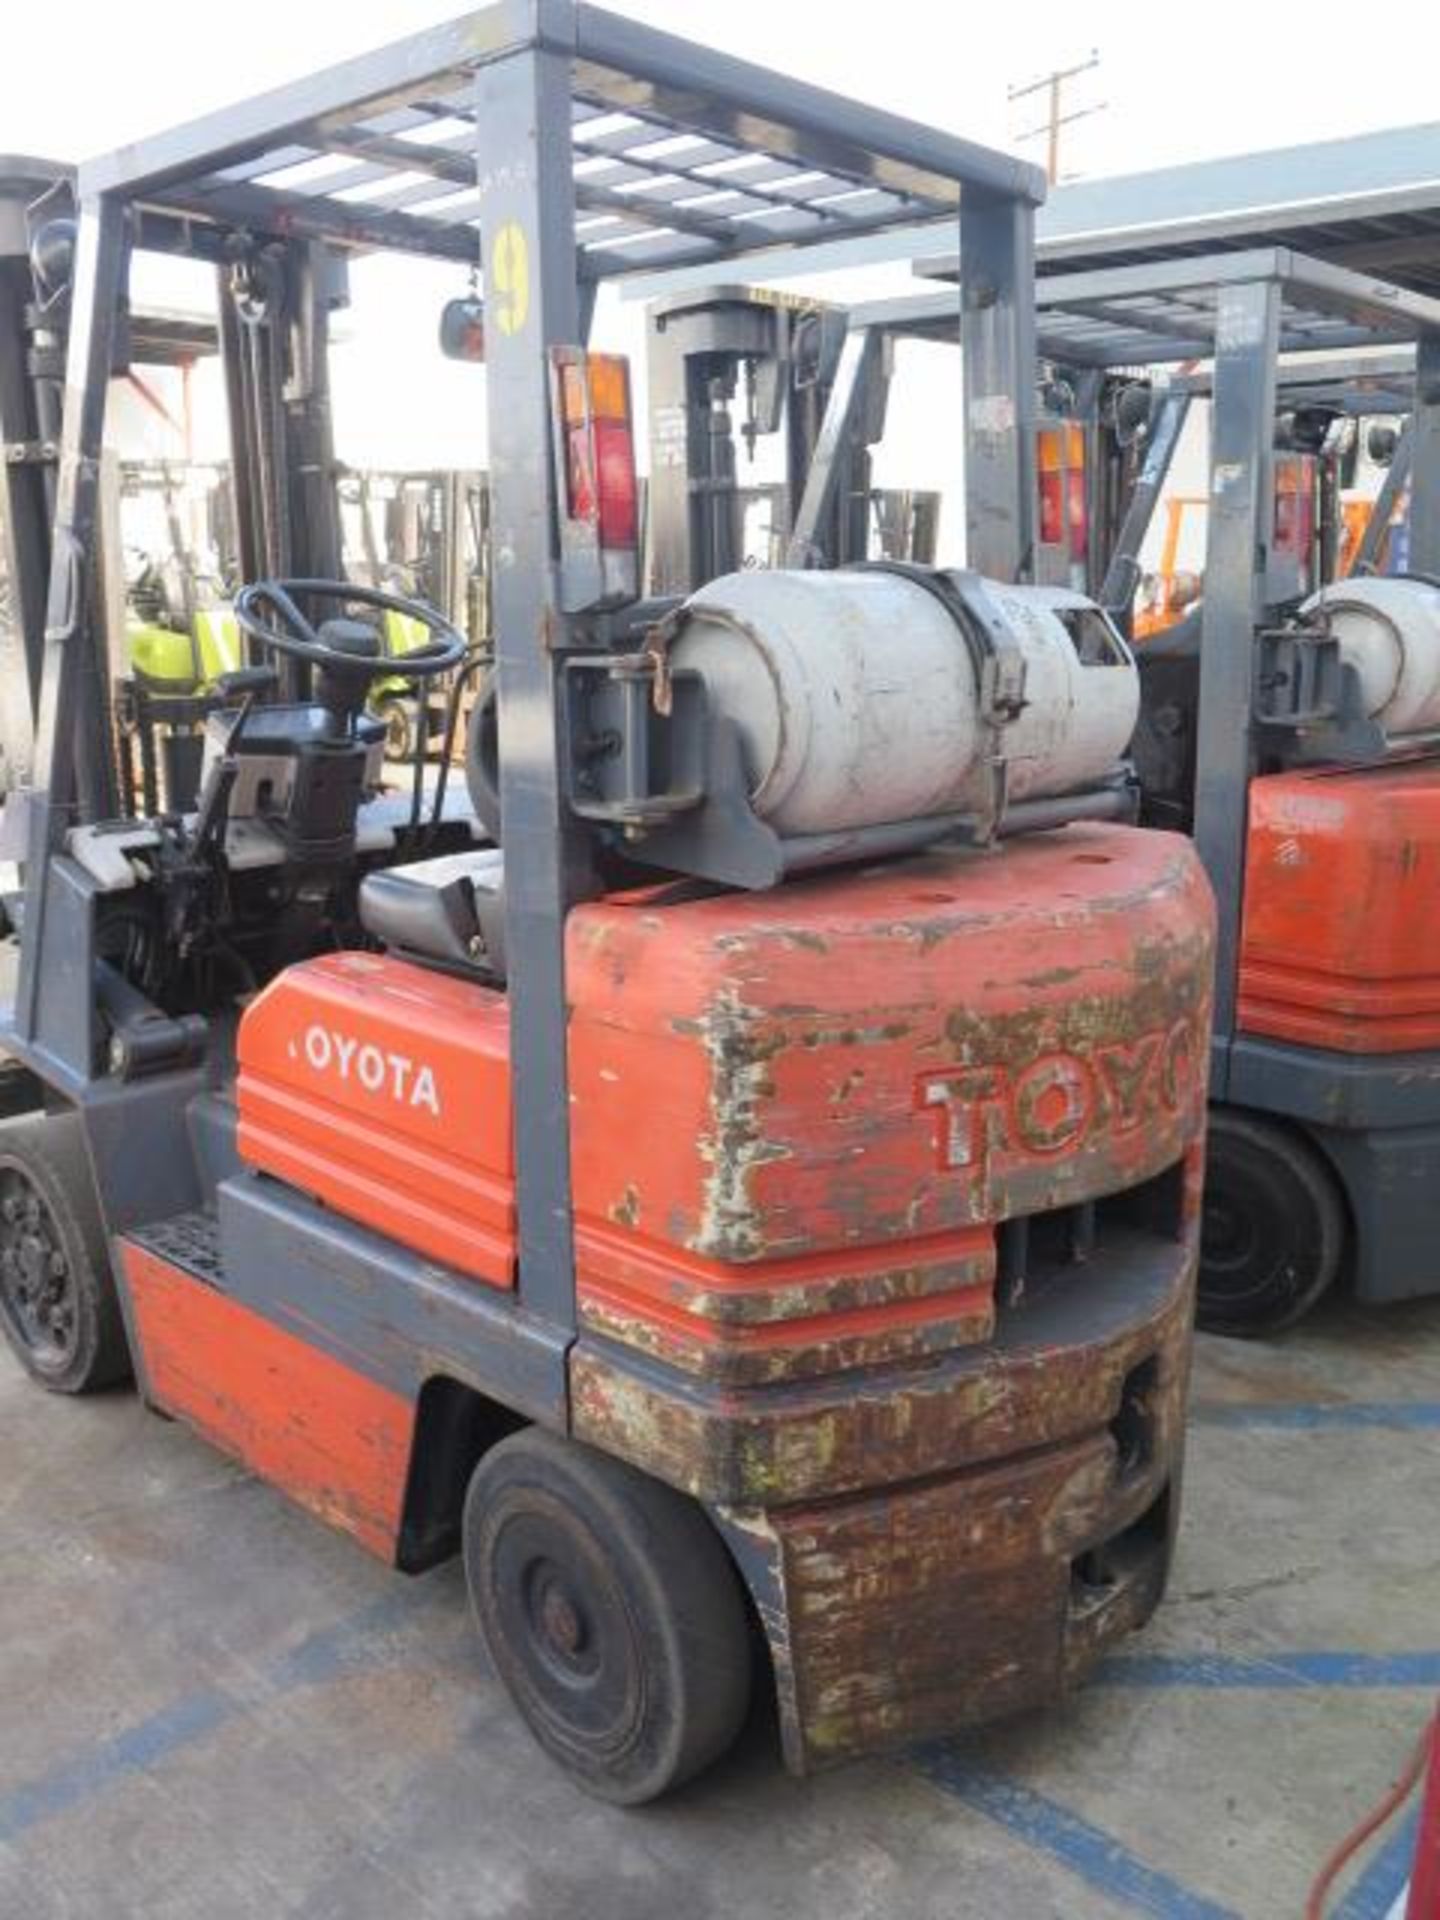 Toyota 5FGC25 5000 Lb Cap LPG Forklift s/n 5FGCU25-85254 w/ 3-Stage Mast 185" Lift Height, Cushion - Image 3 of 11